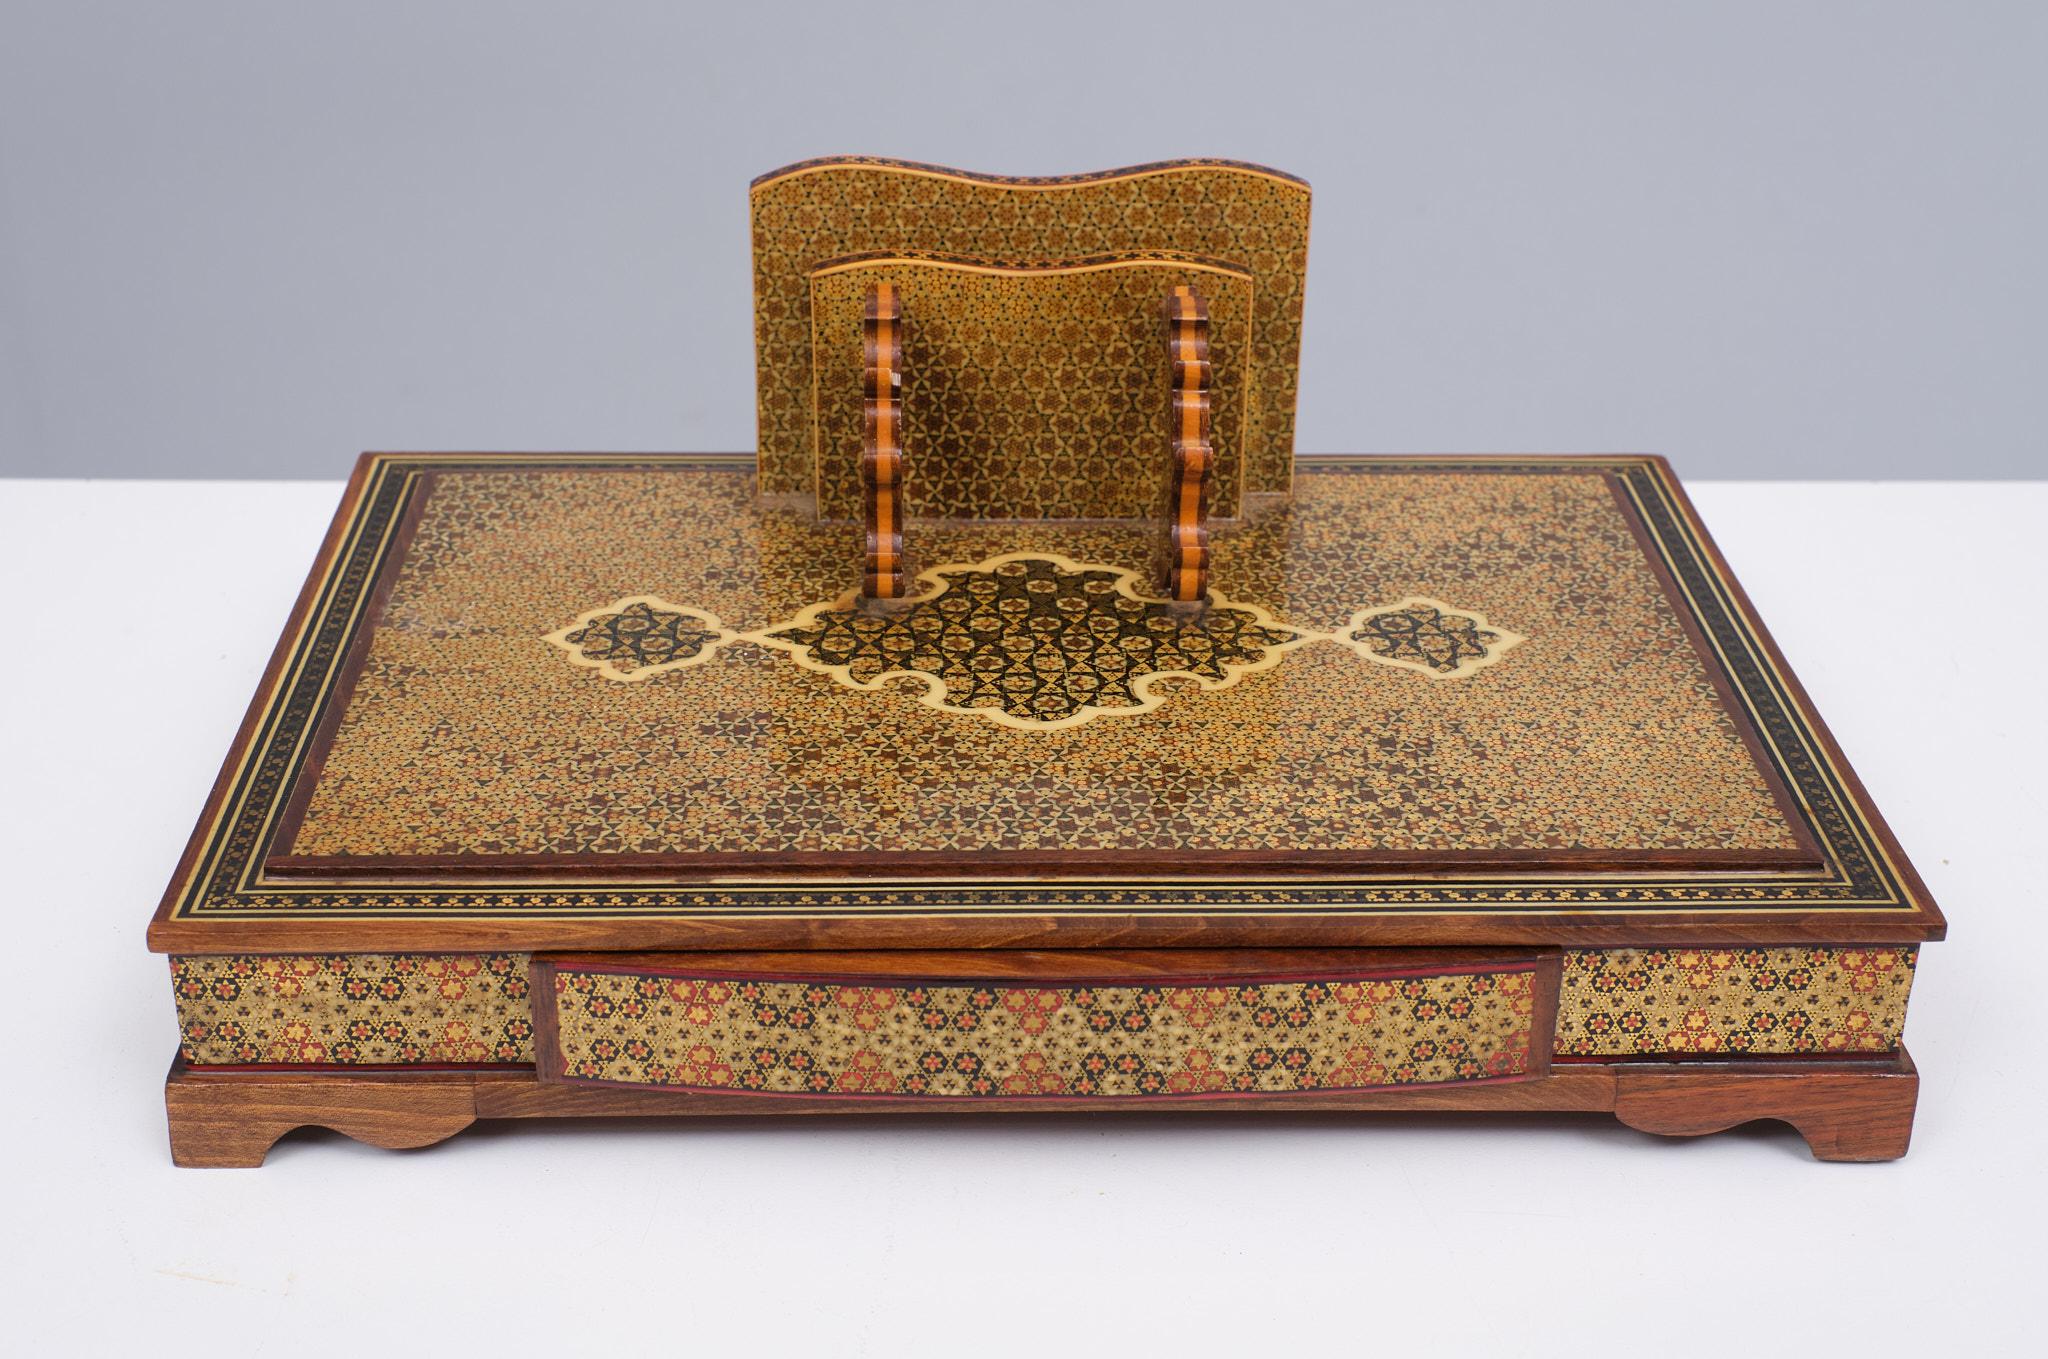 Very nice Three piece desk set 
The mosaic design work is gorgeous, using various color woods and other natural materials. 
This wooden desk set pen holder is completely covered with Khatam inlaid mosaic marquetry. Khatam is a Persian version of